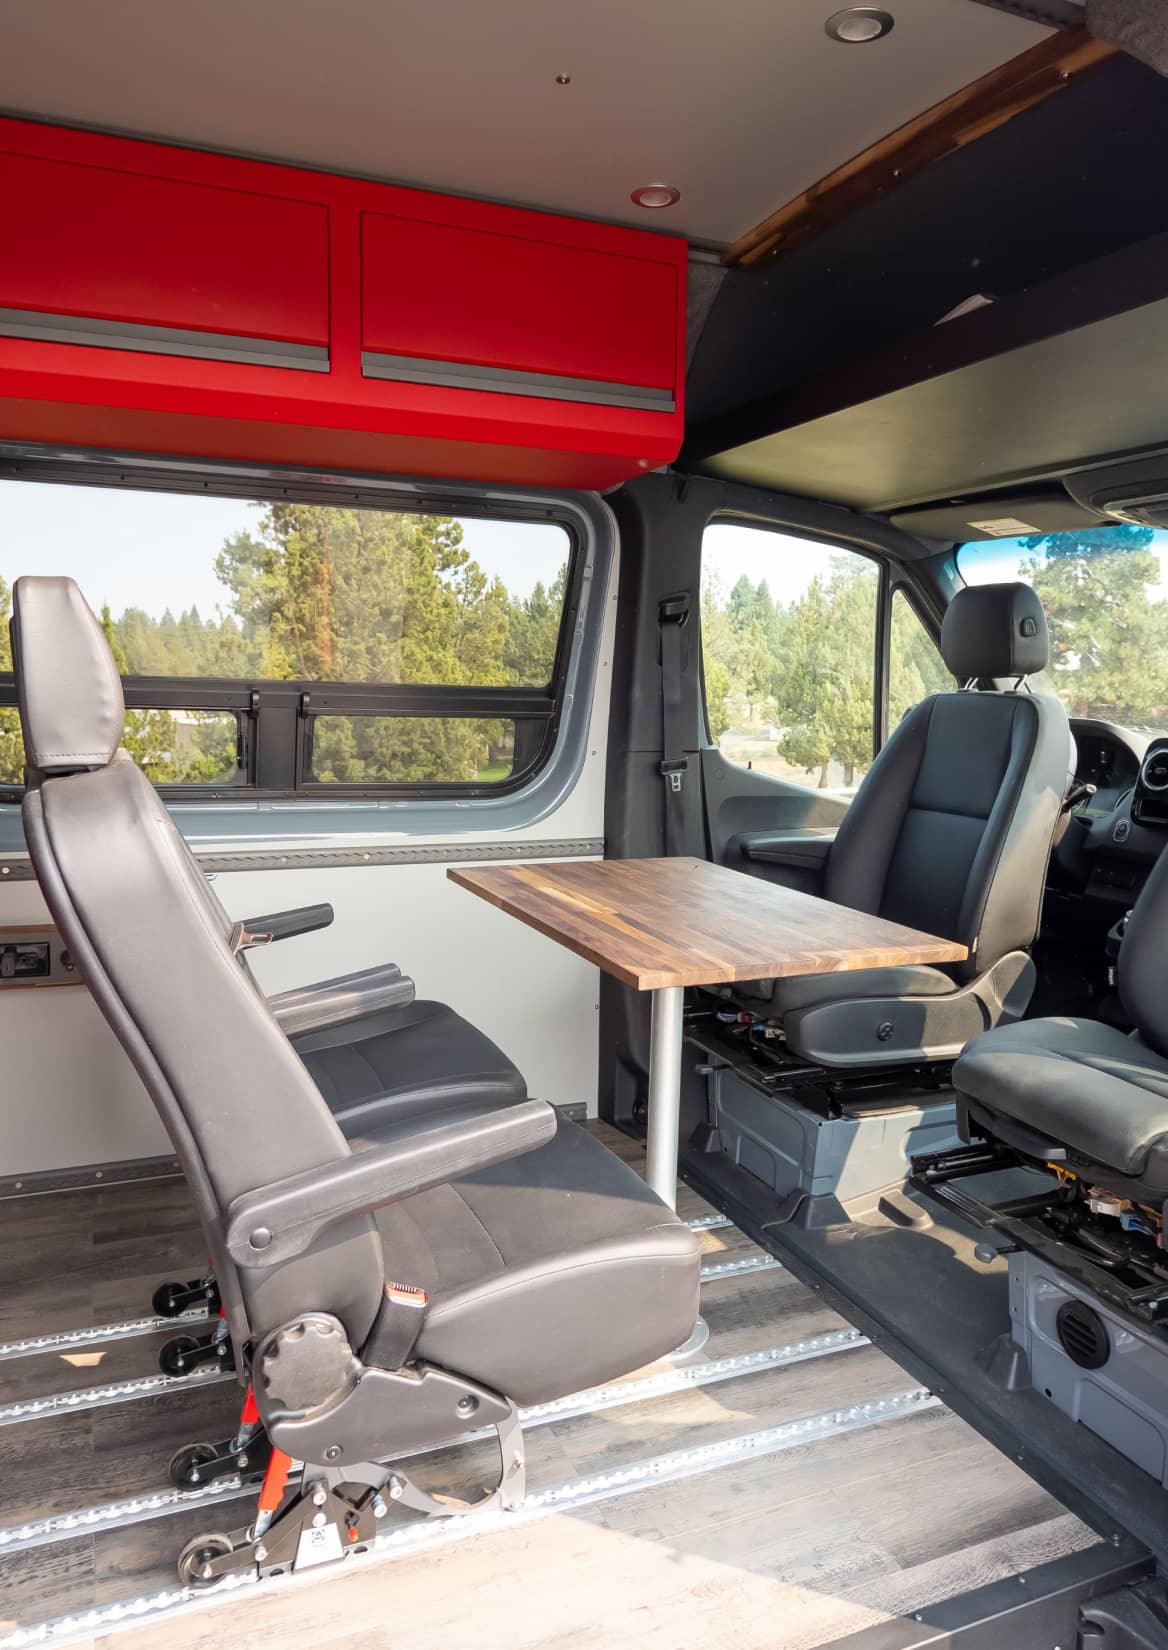 A van inside with red Esplori cabinets